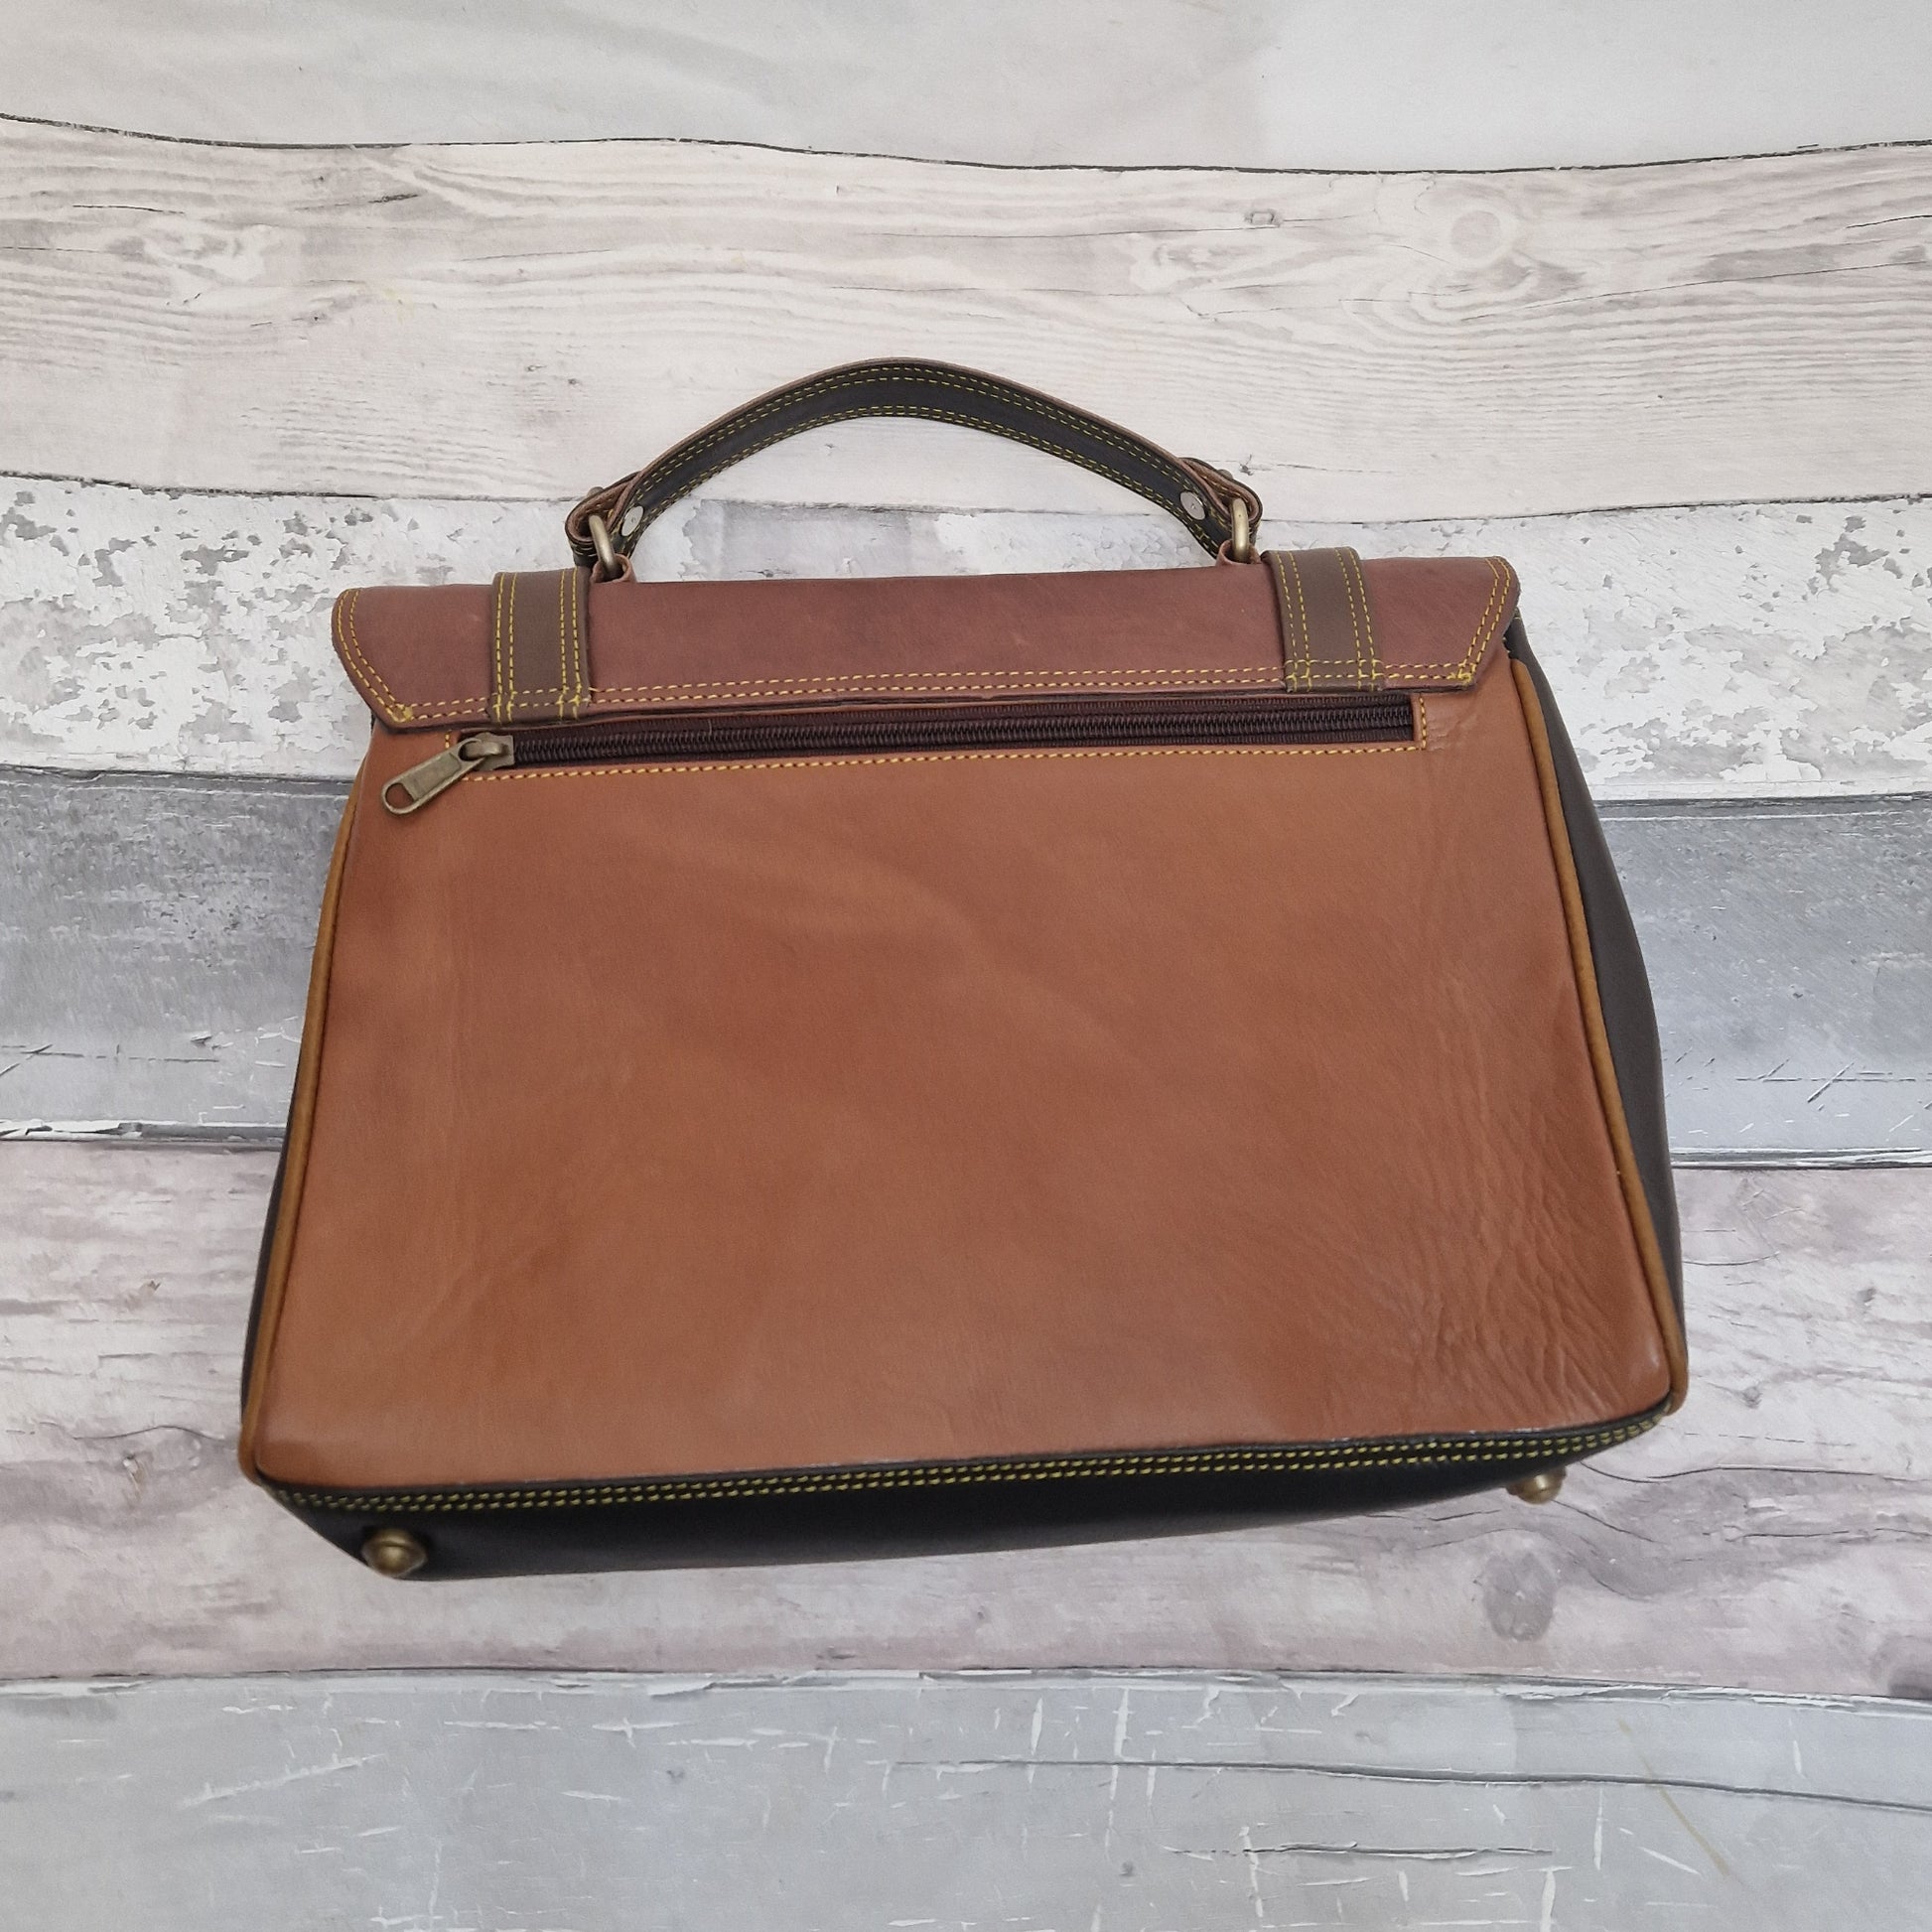 Satchel style leather bag in mulitple shades of brown, finished with brass fixings and buckles.